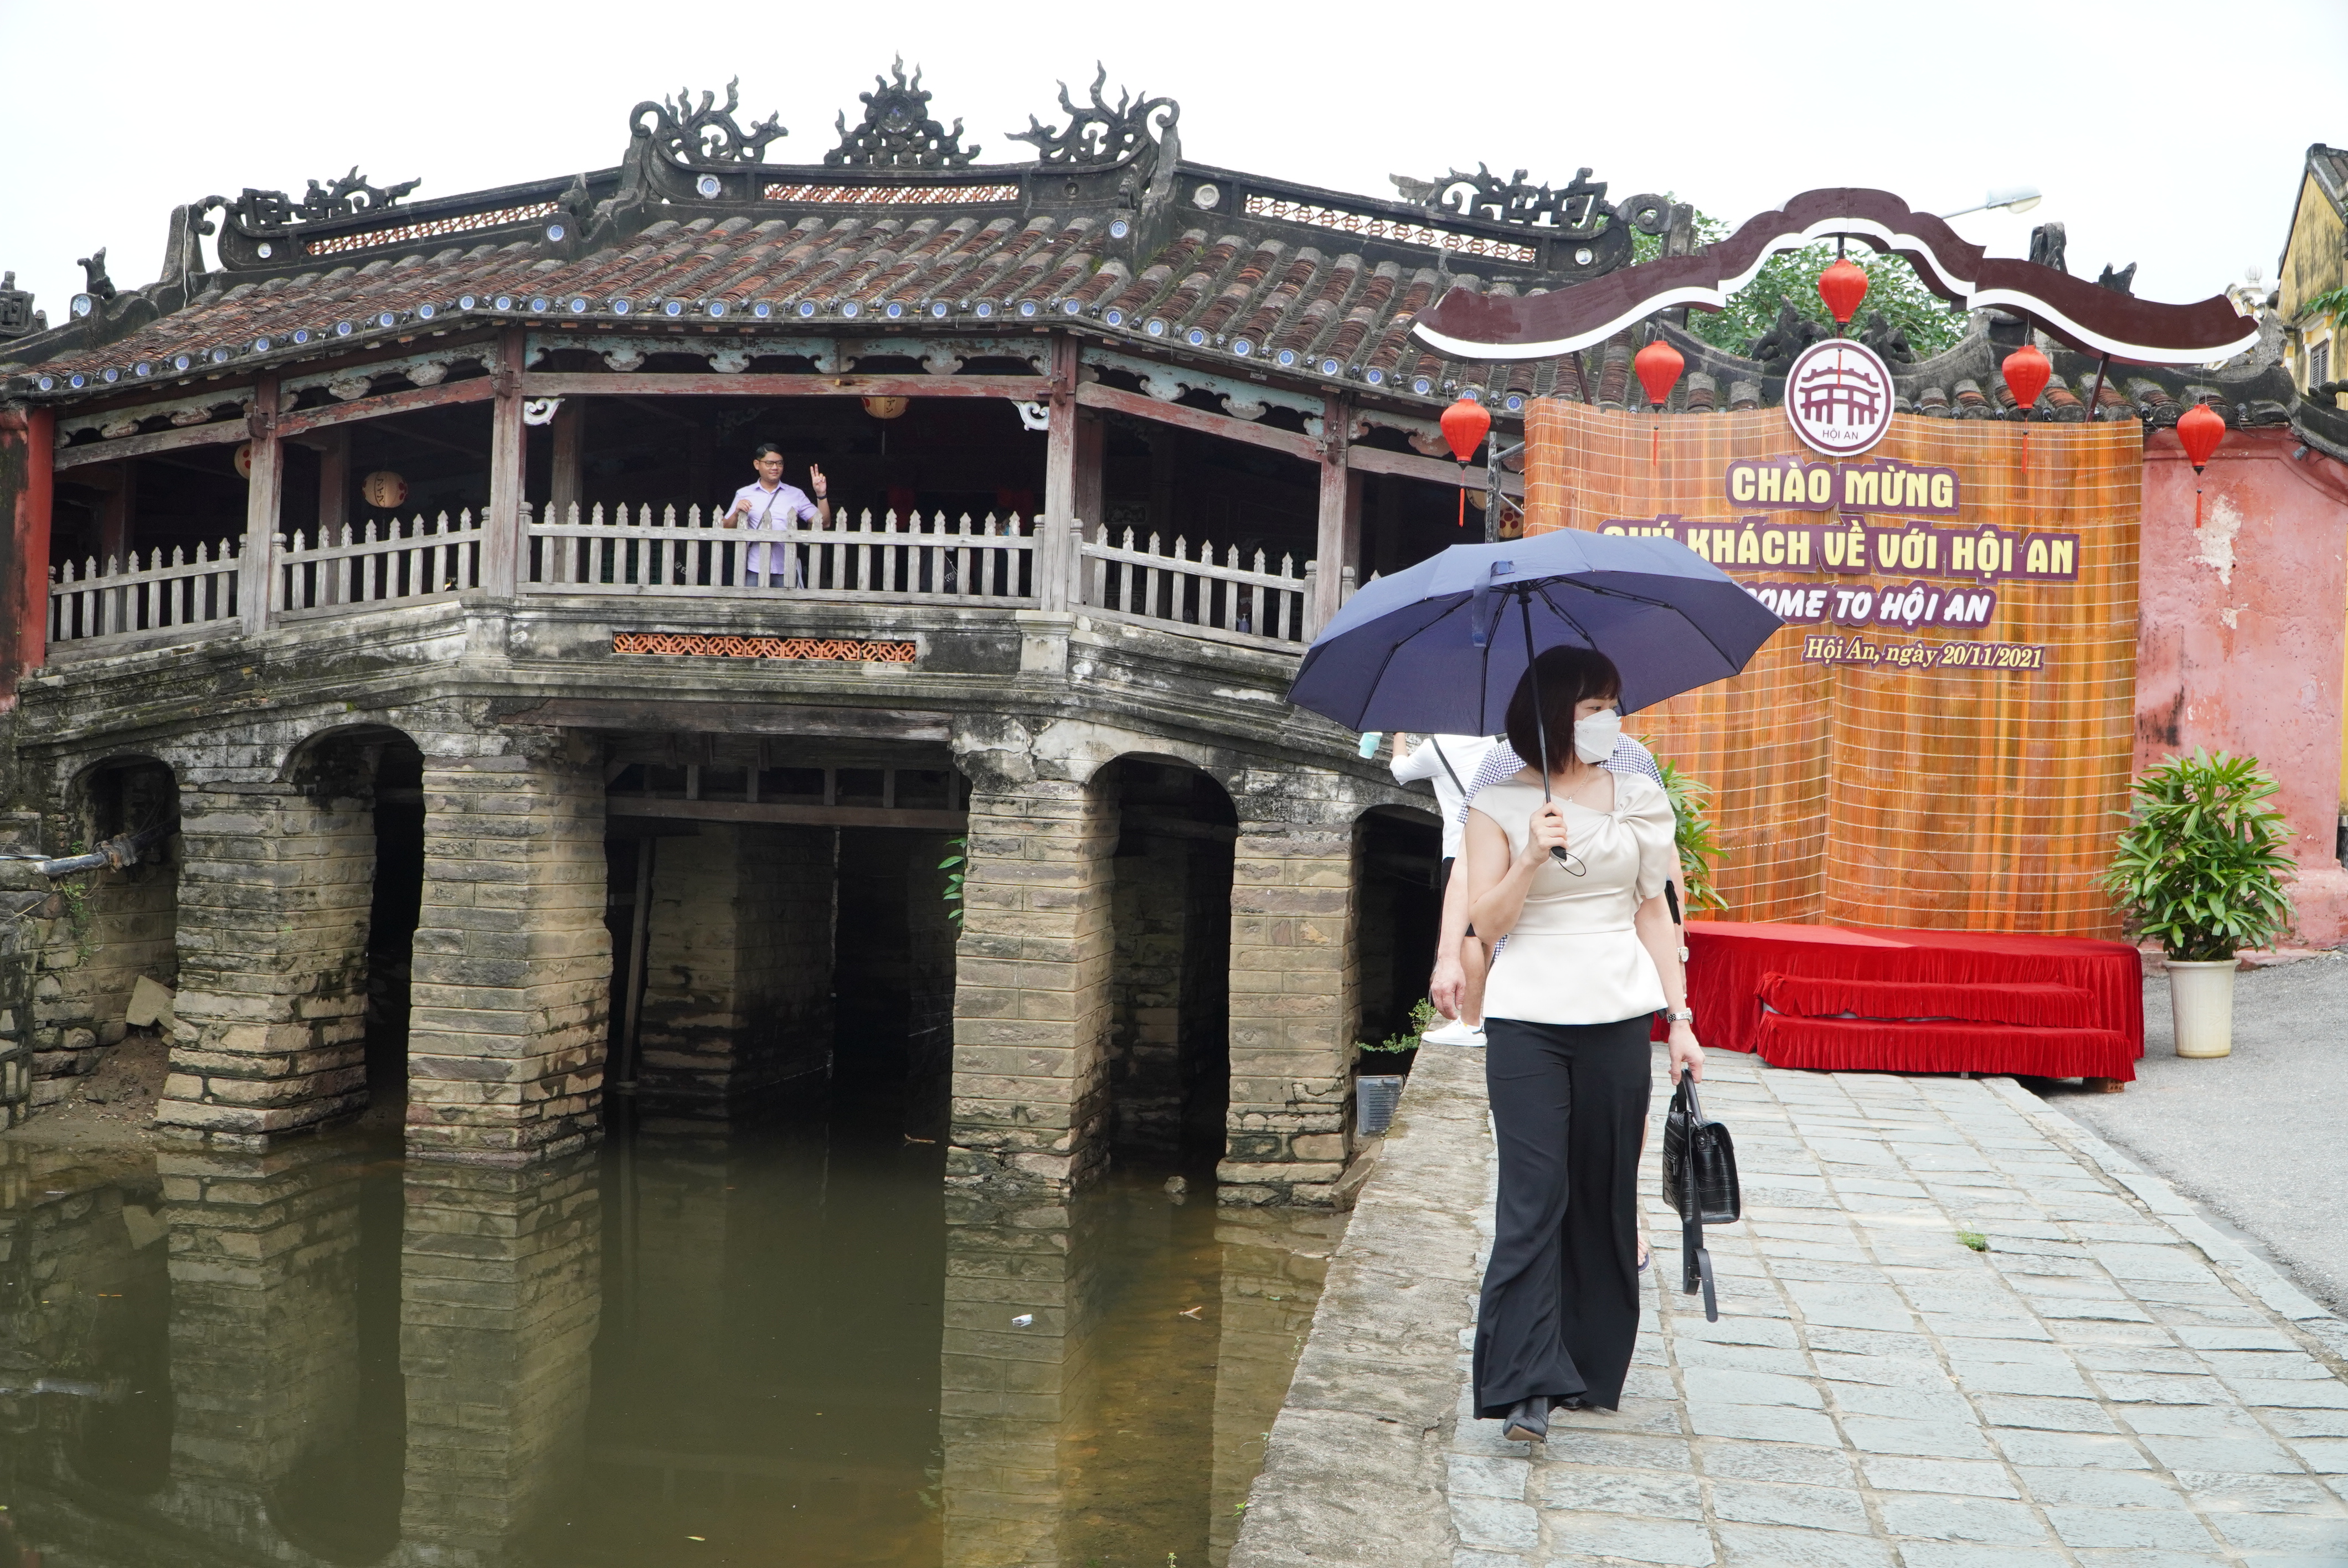 A peek at restoration of Hoi An’s iconic Cau Pagoda in central Vietnam